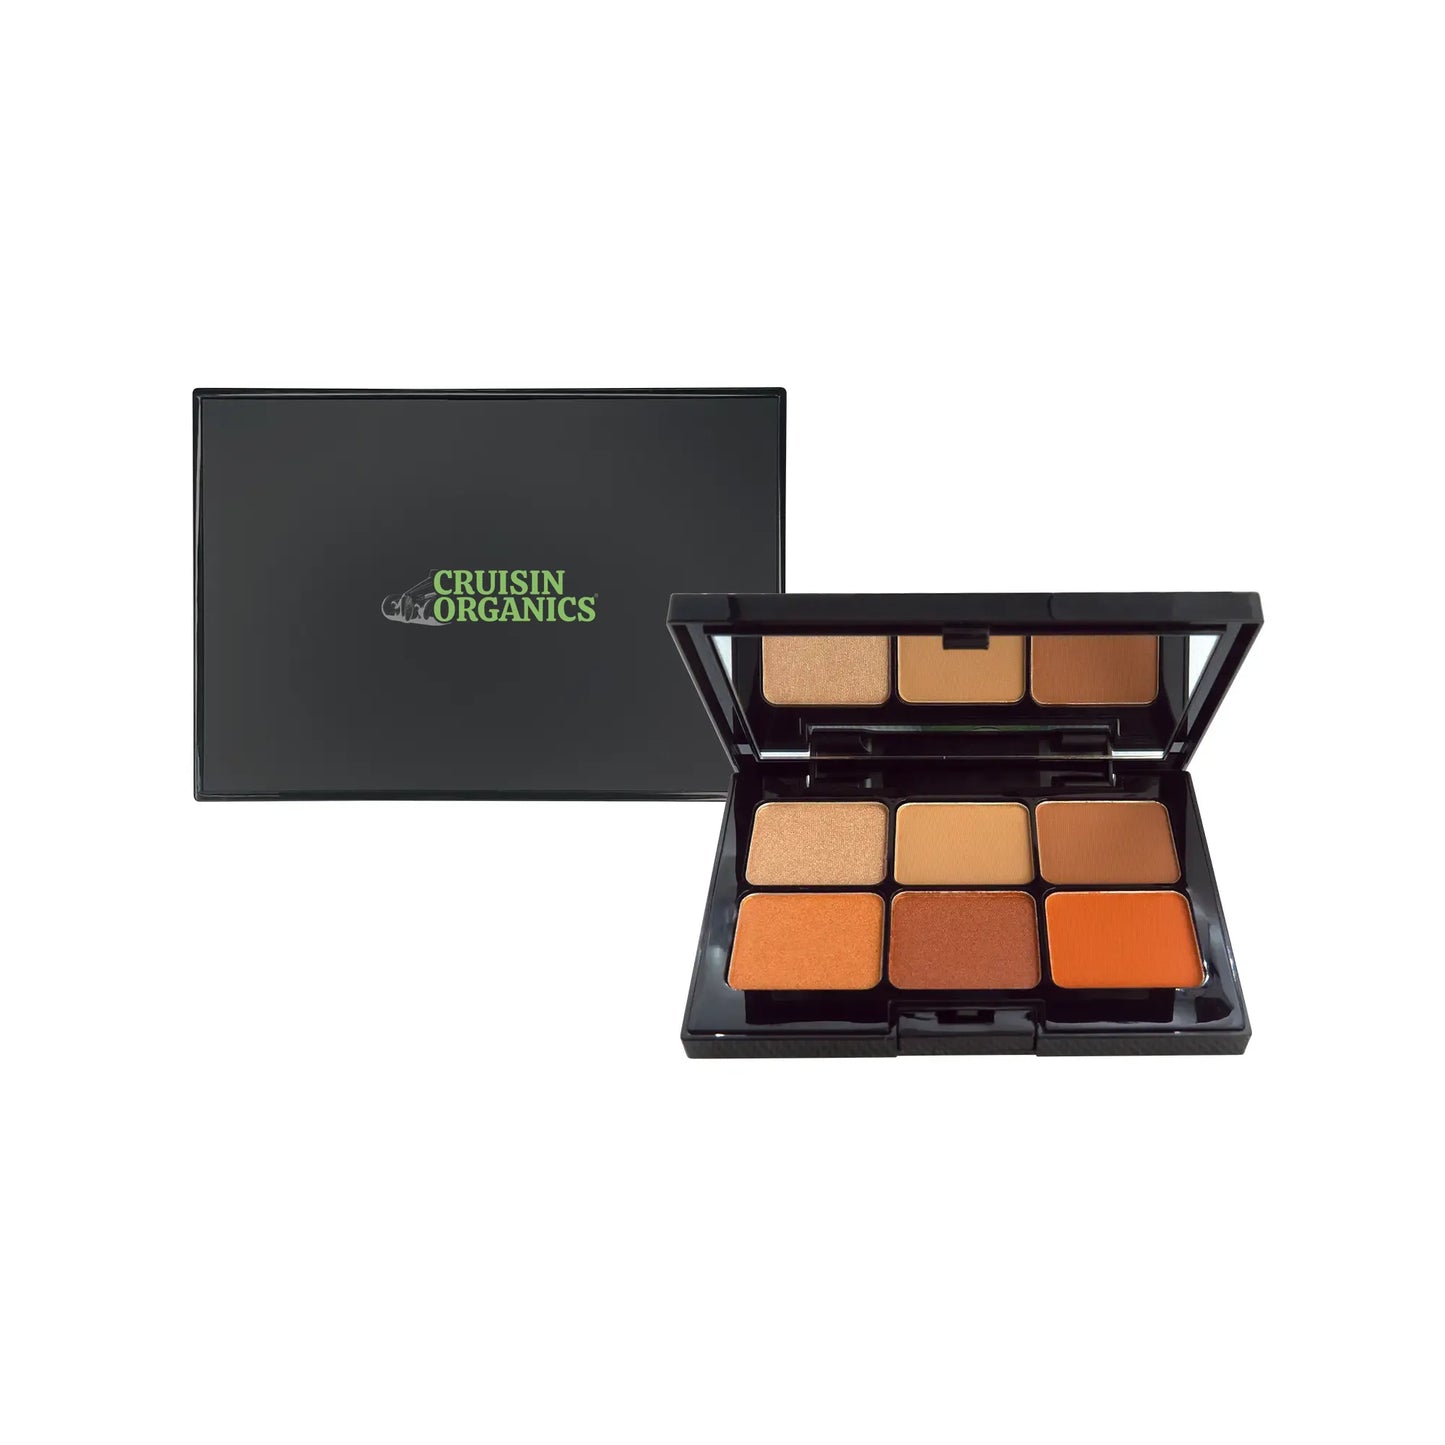 Embrace bold, beautiful eyes with the Spiced Sunset Eyeshadow Palette. From day to night, easily mix and match colors for a stunning, illuminating finish. With its careful and loving application, this palette not only enhances your look, but also protects the delicate eye area. Available now from Cruisin Organics!